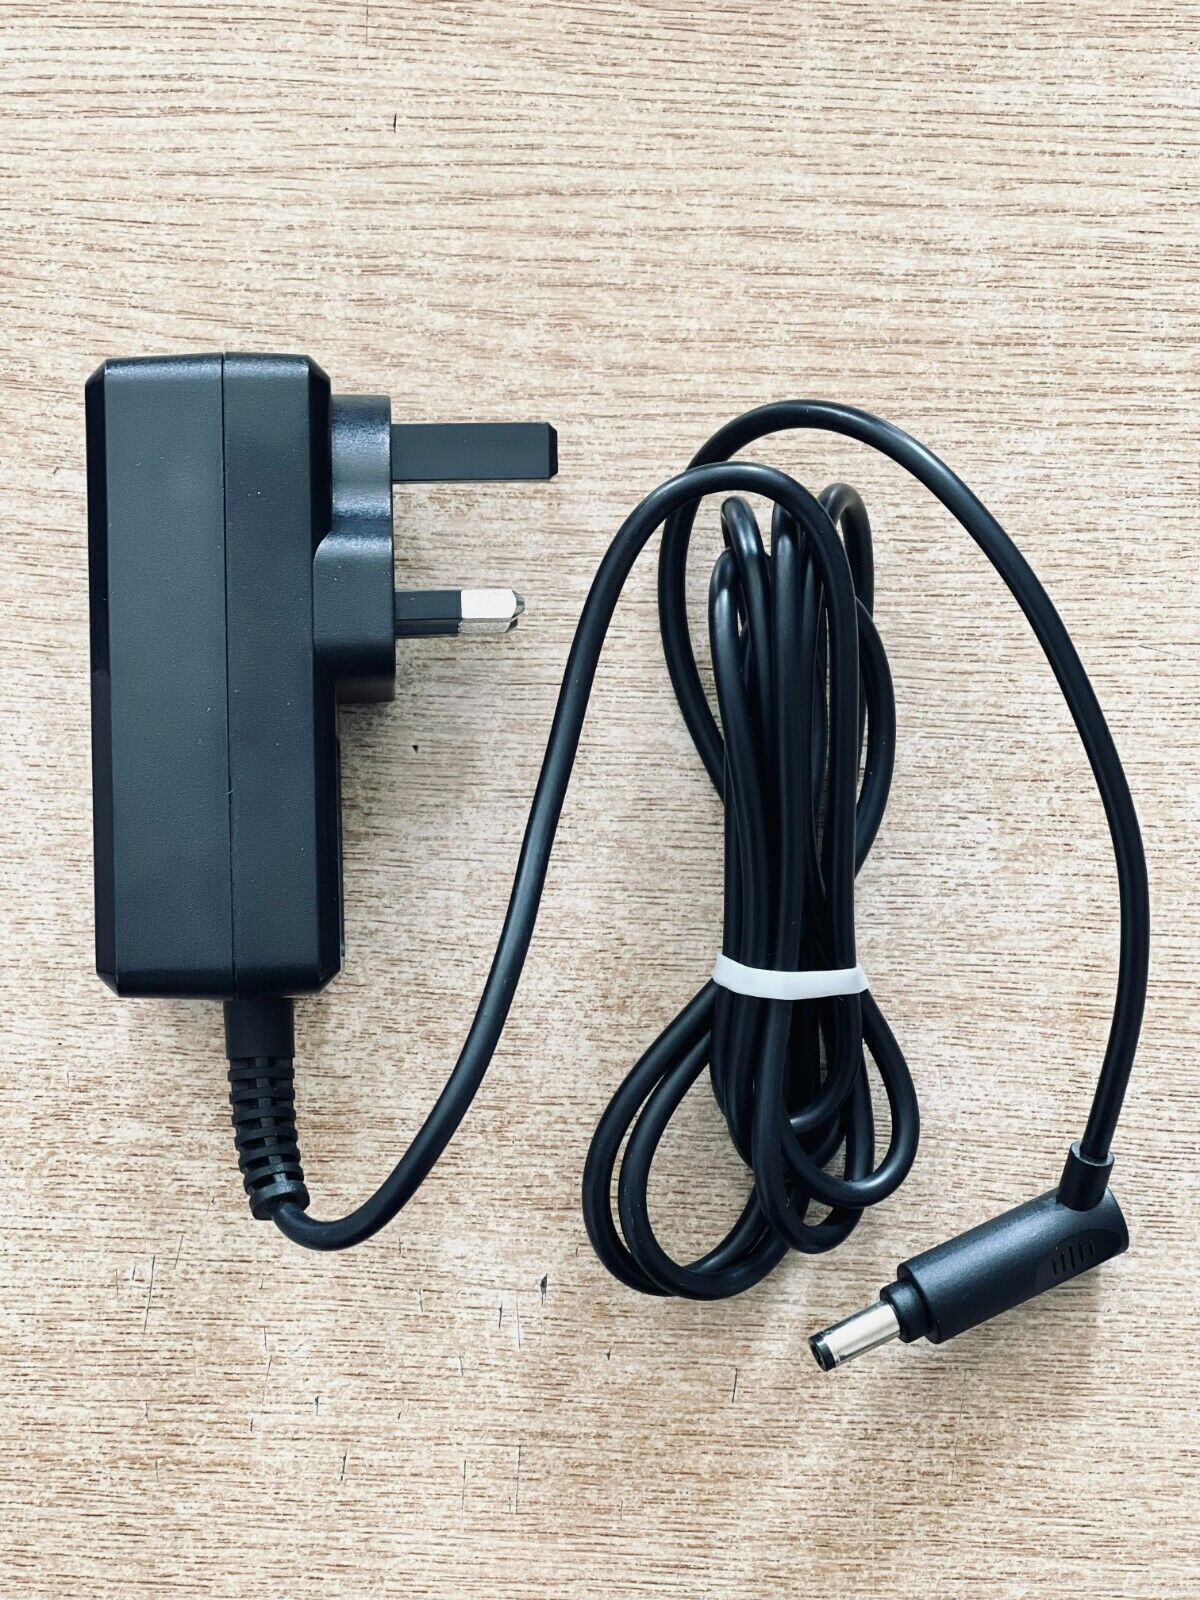 *Brand NEW*ADAPTER CHARGER PLUG FOR LED LAMP NAIL DRYER NAILS UK 12V 2A AC/DC POWER SUPPLY - Click Image to Close